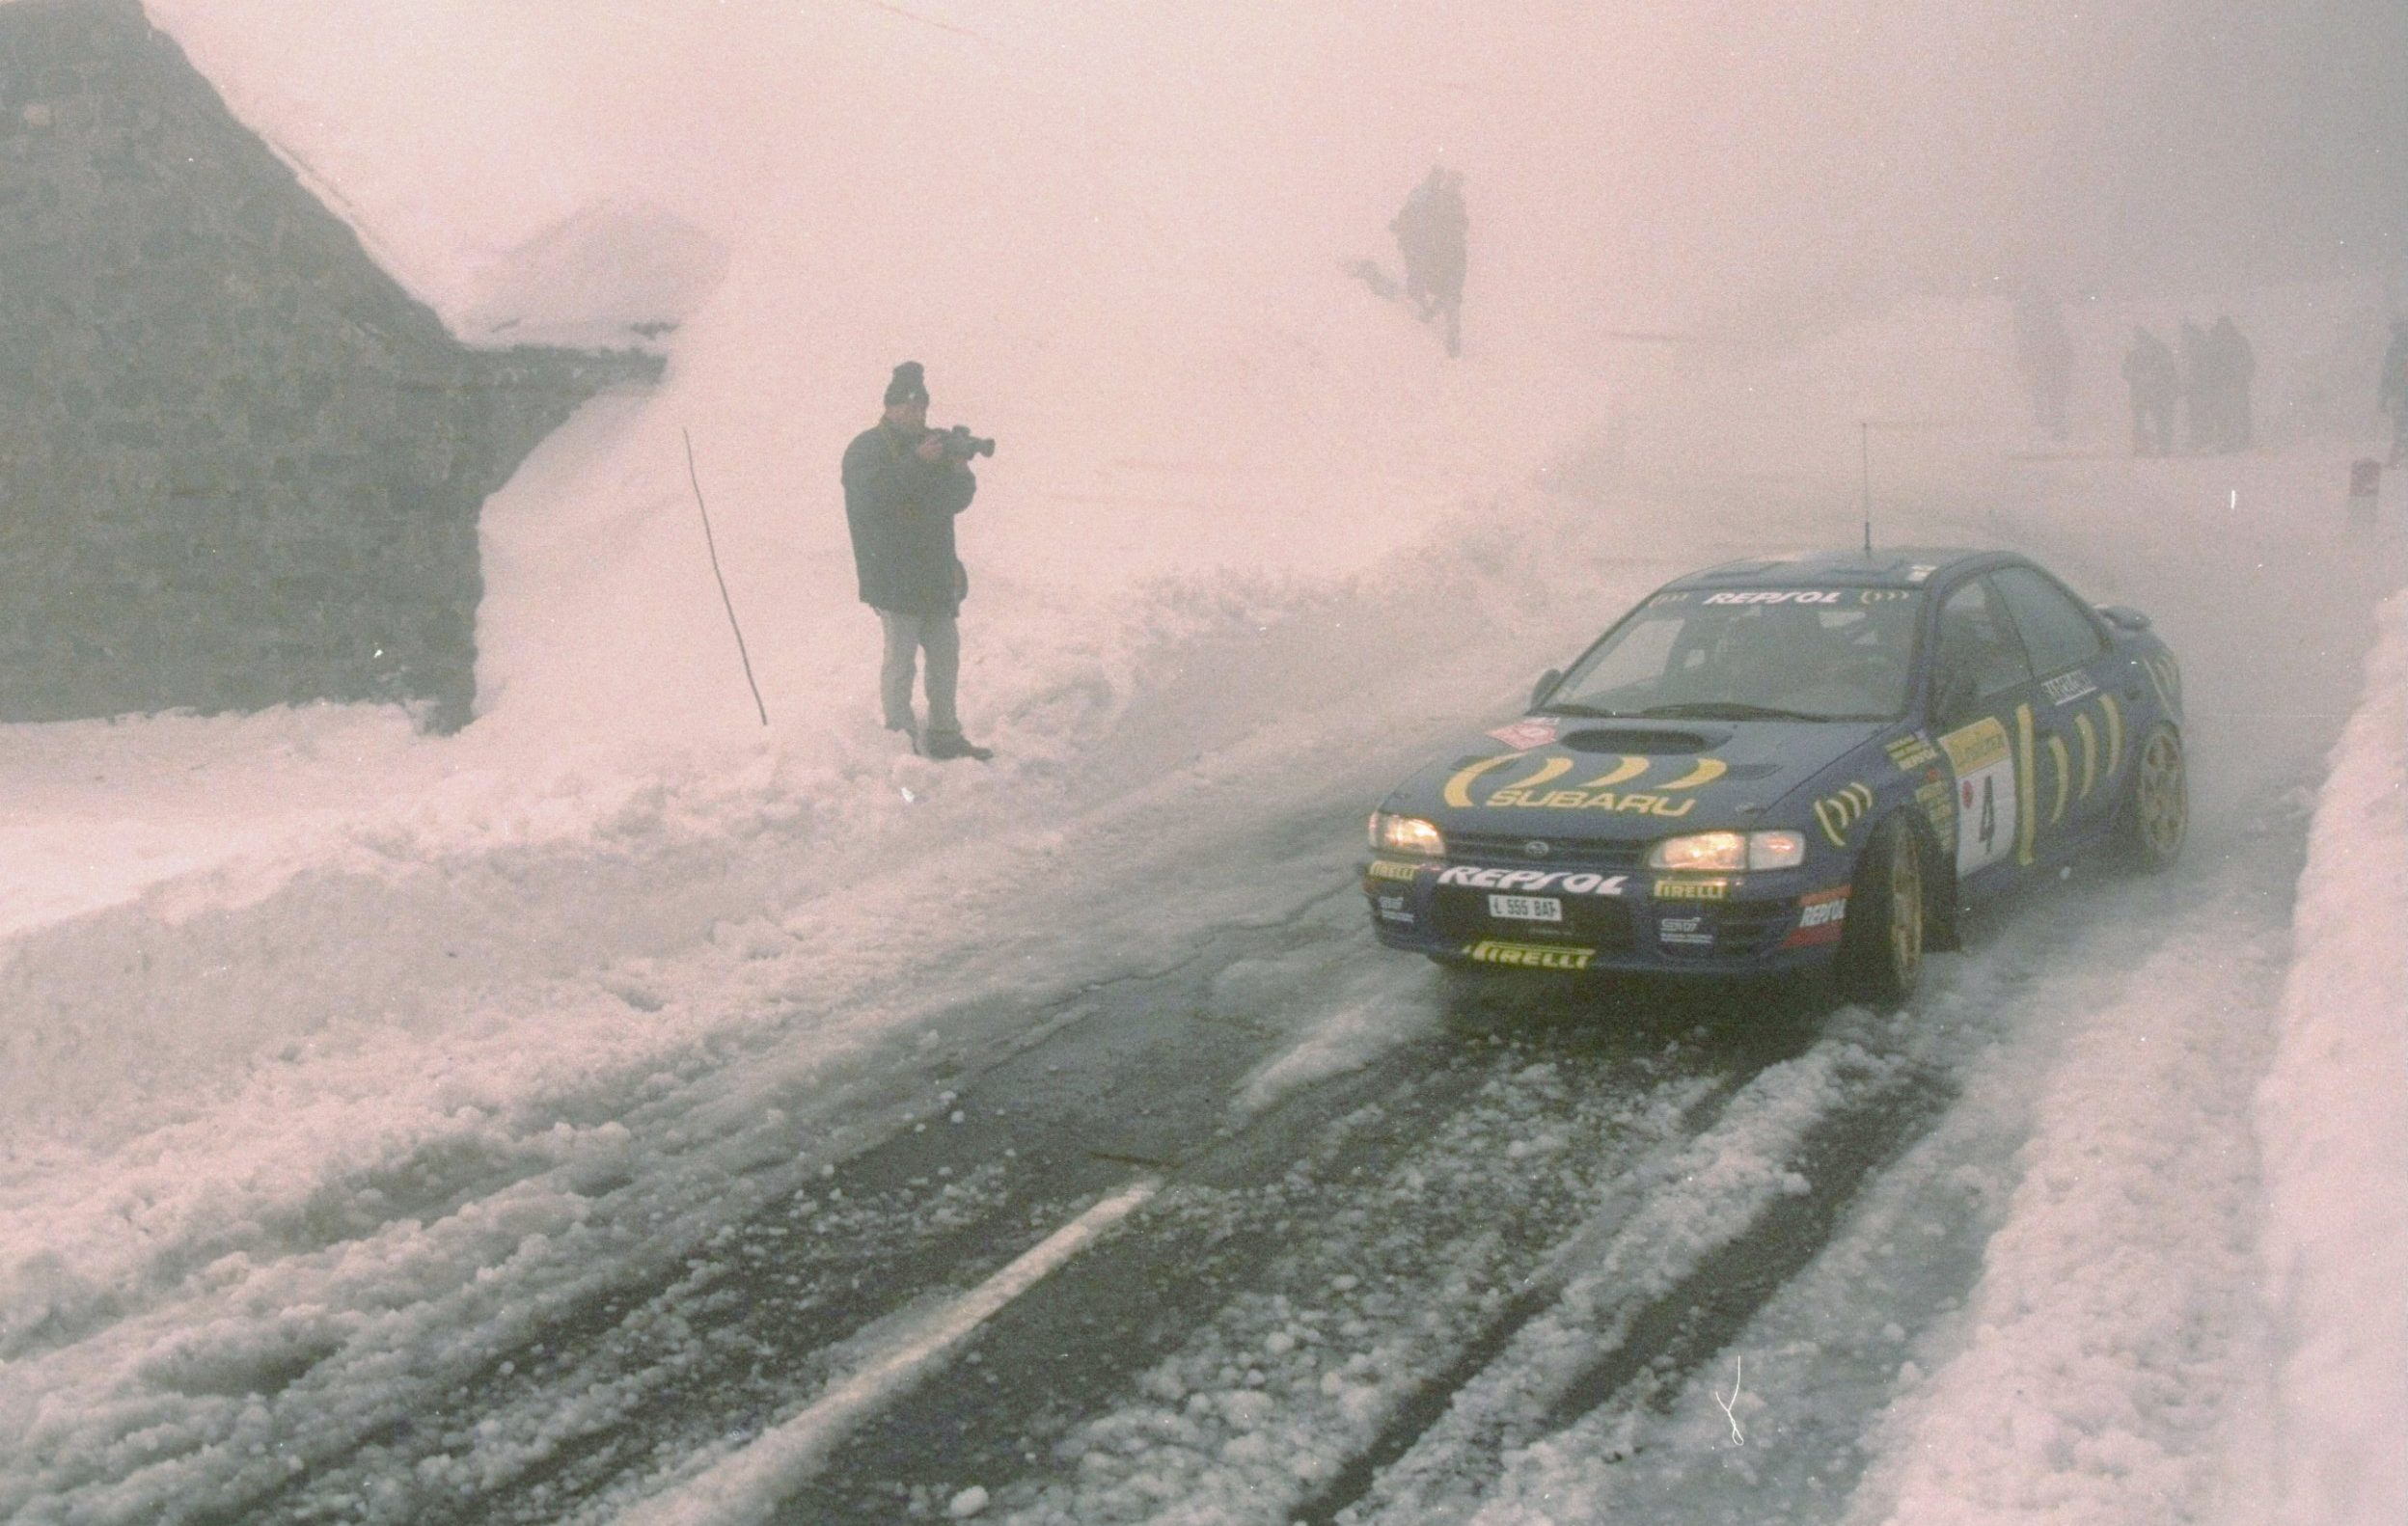 Jan 1995: Colin McRae and Derek Ringer of Great Britain in action in their Subaru Impreza during the Monte Carlo Rally in Monaco. McRae and Ringer retired from the rally after an accident. Mandatory Credit: Pascal Rondeau/Allsport